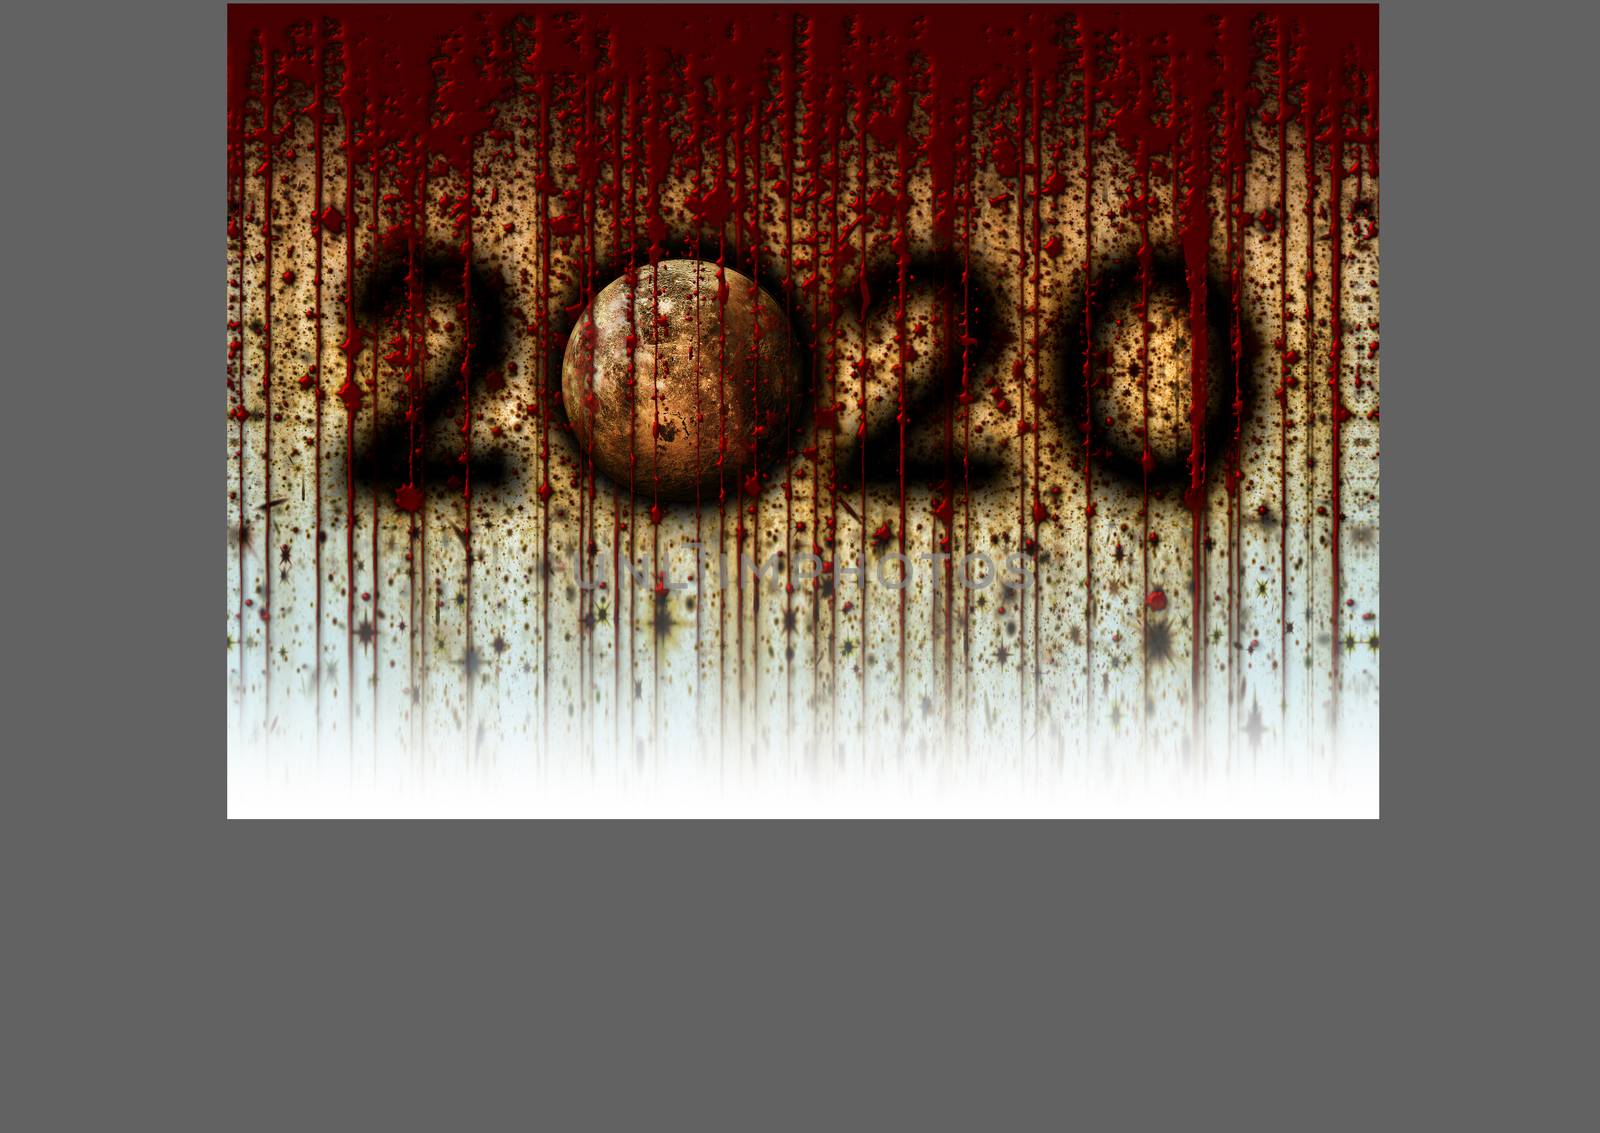 The Year 2020 and the Moon presented in a grunge style with dark shadows, dripping blood; reds, yellows. 3D Illustration